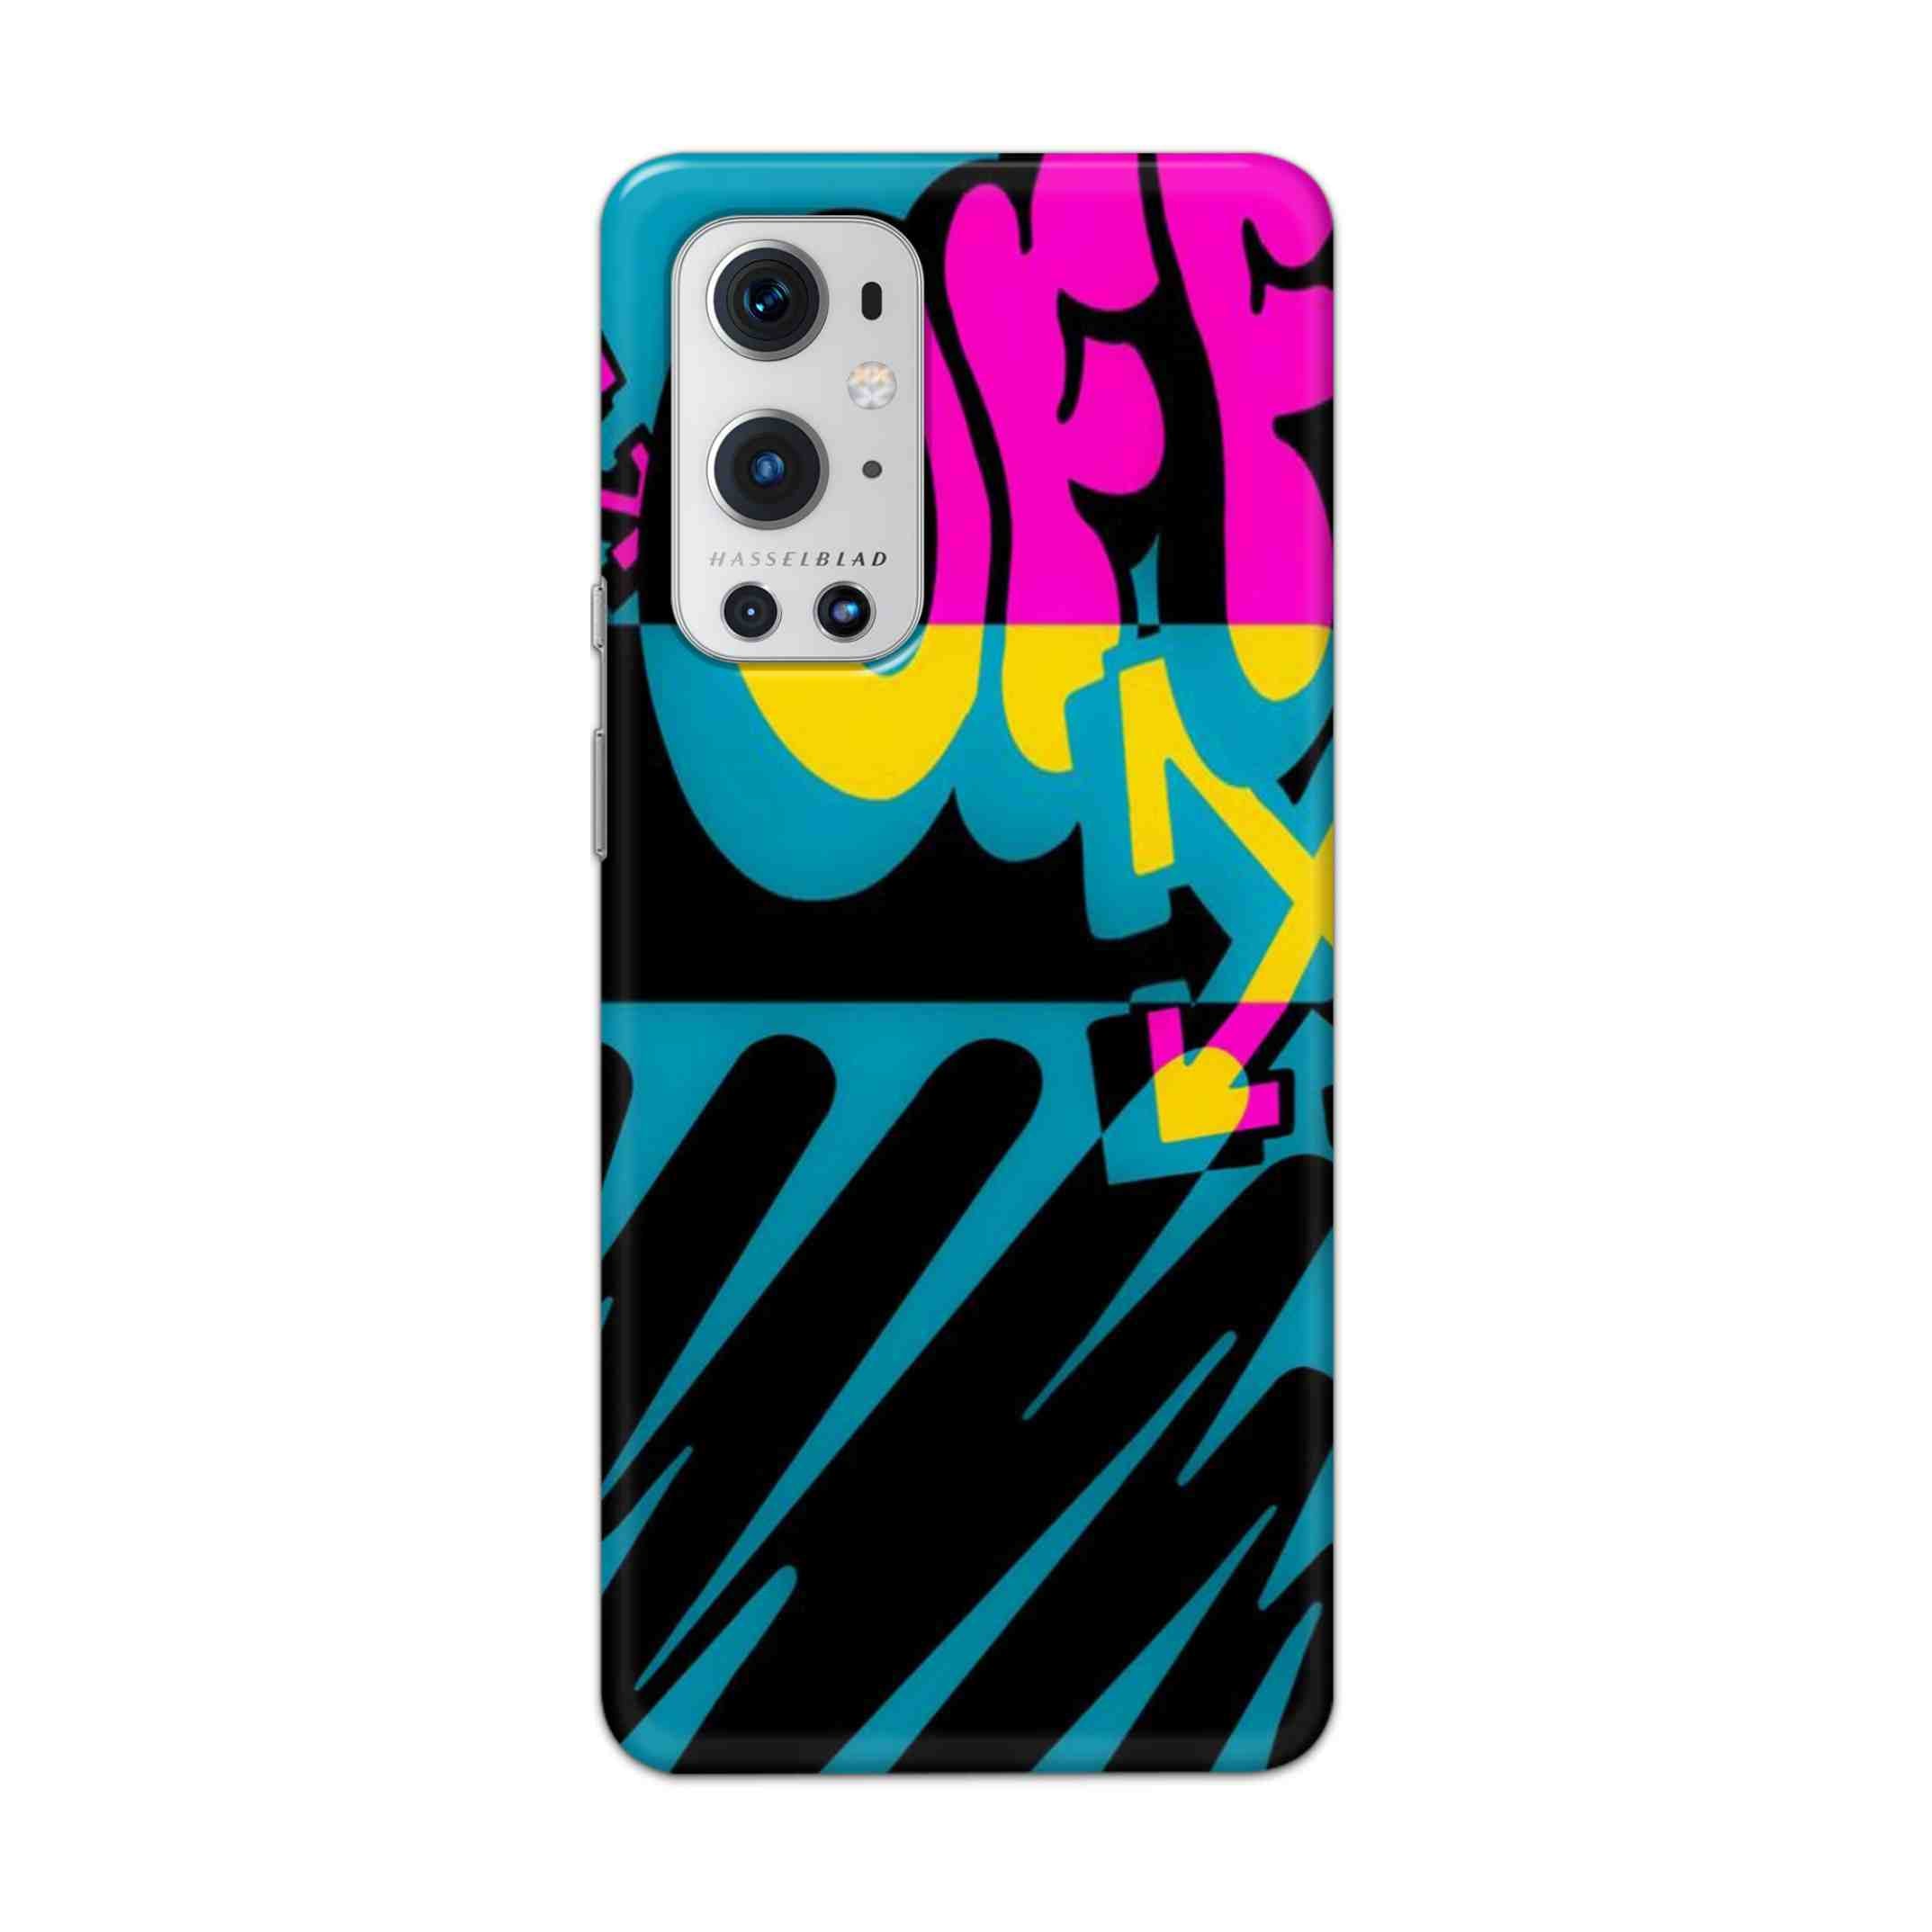 Buy Off Hard Back Mobile Phone Case Cover For OnePlus 9 Pro Online